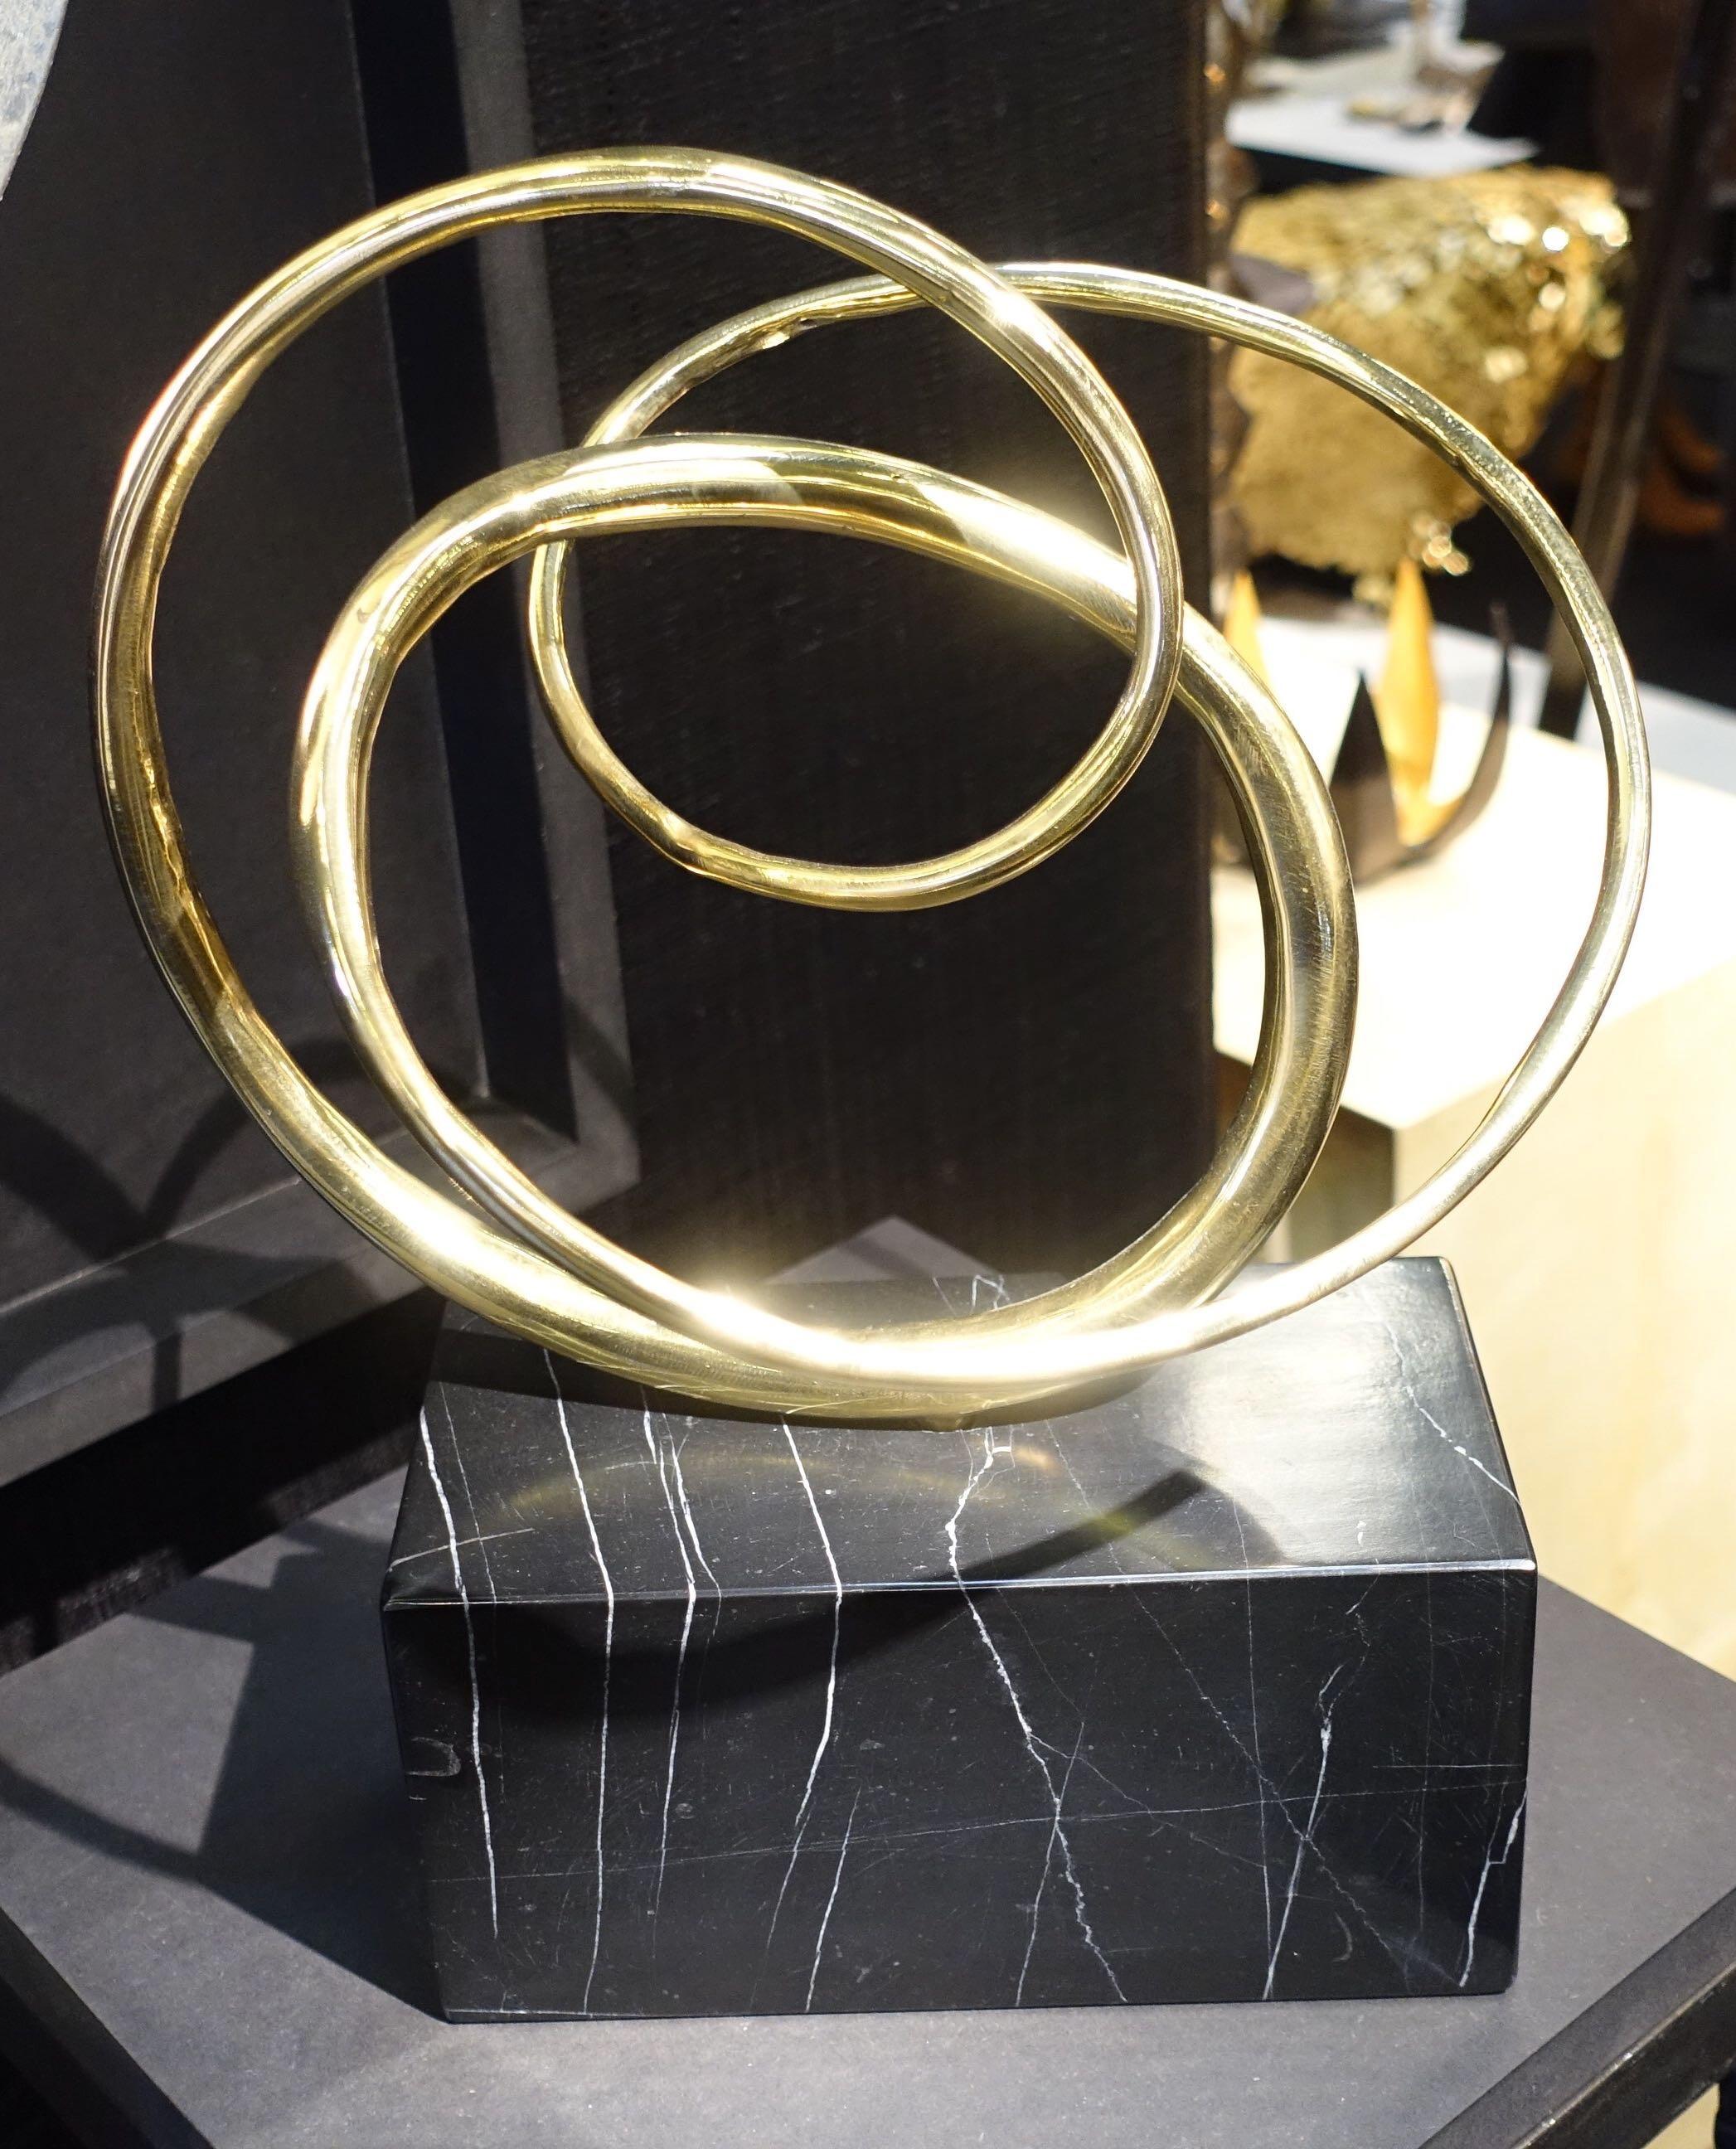 Contemporary German three bronze interlocking rings on black marble stand sculpture.
Moves to show different positions.
Stand measures 8 inches x 4 inches.


 